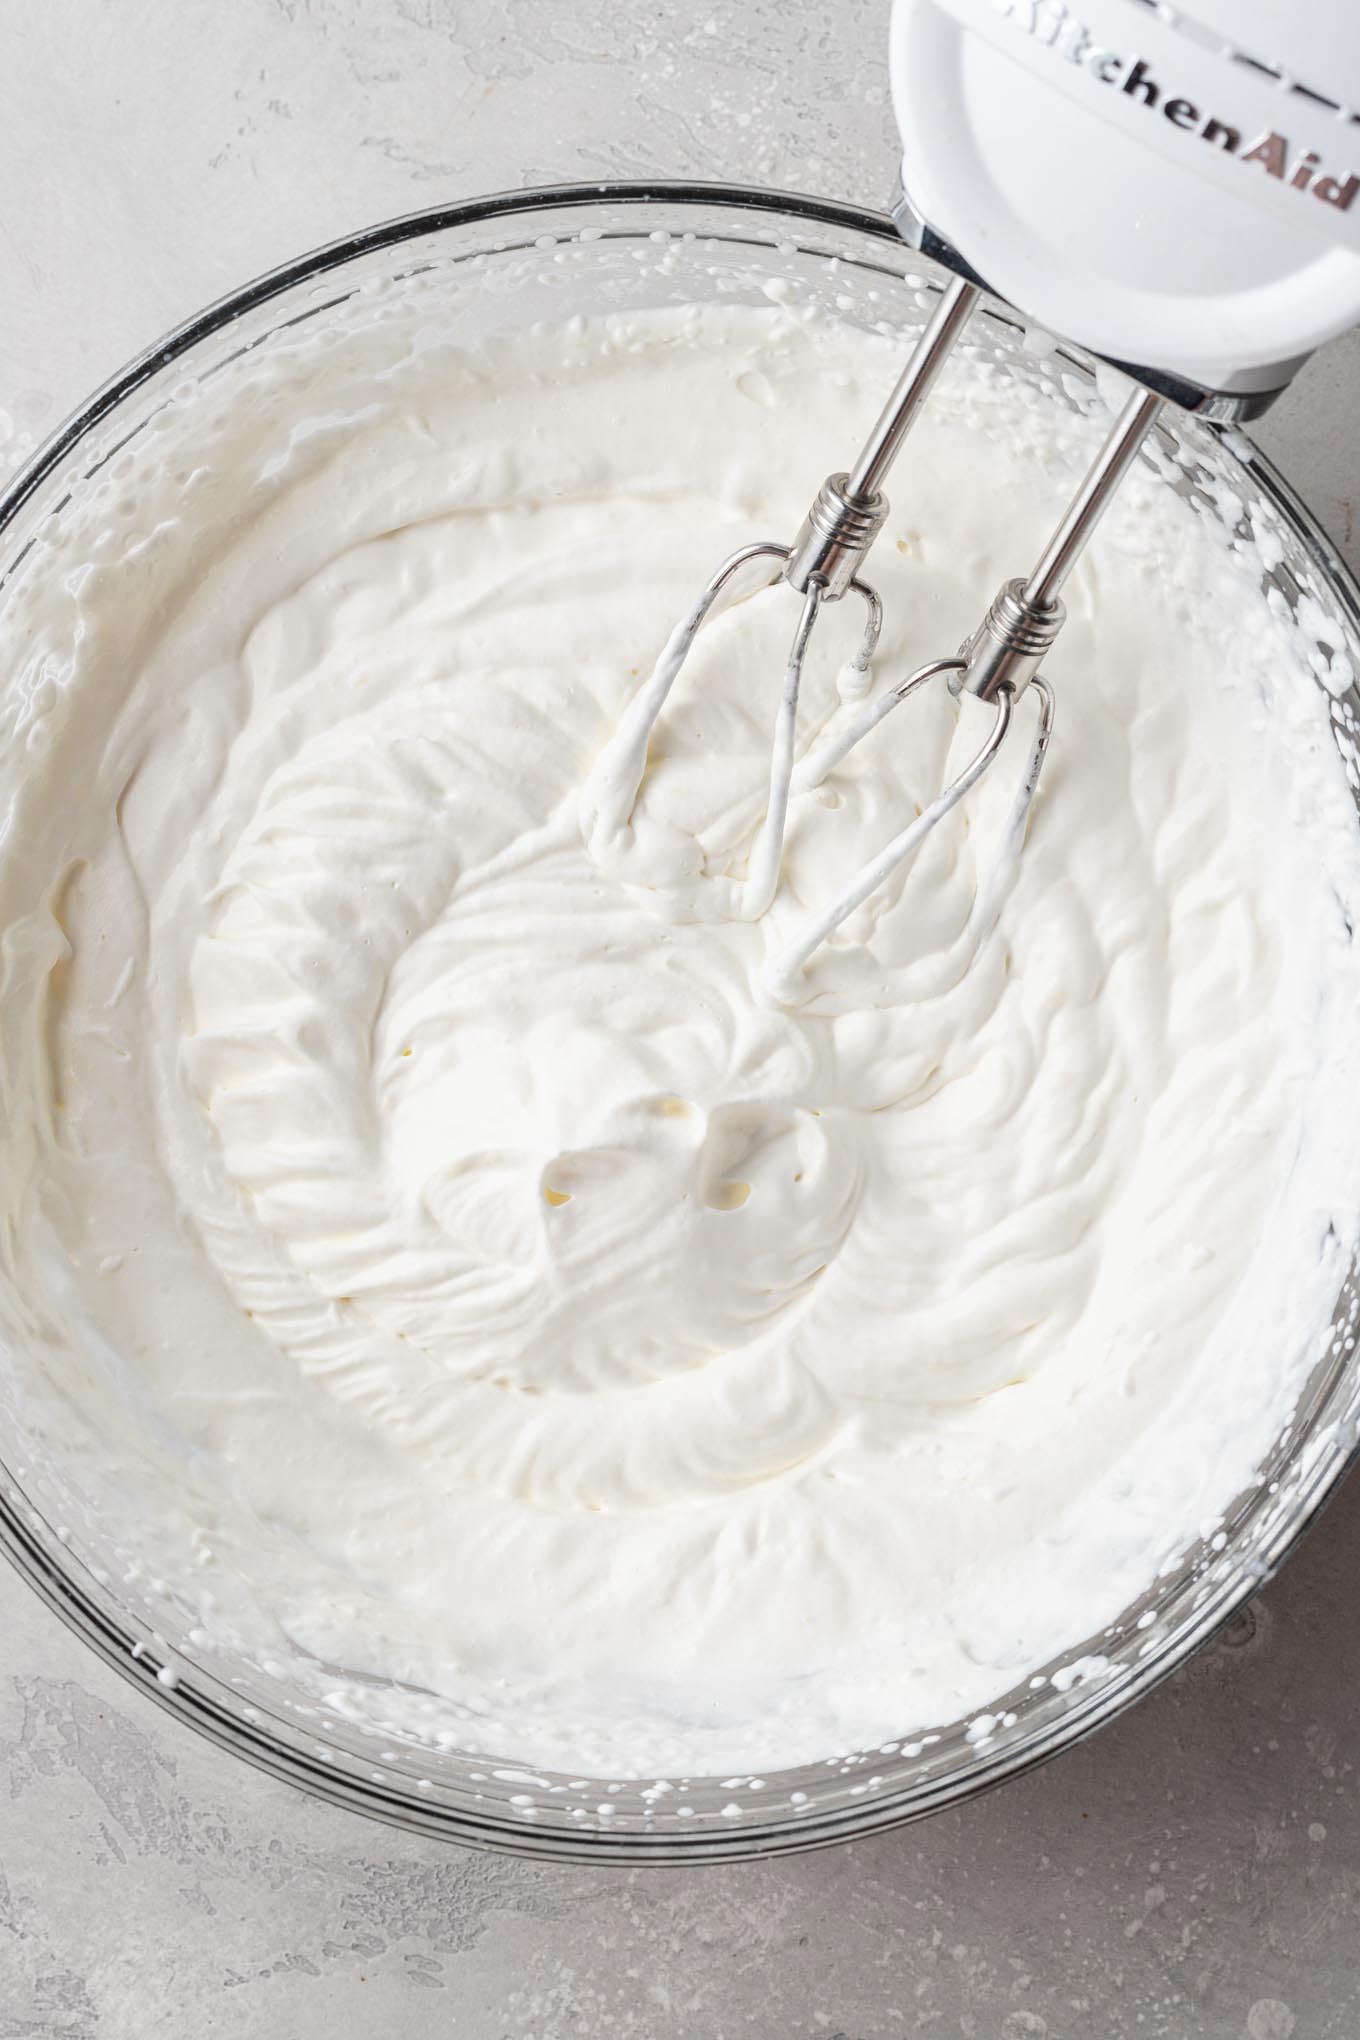 An overhead view of whipped cream beat to stiff peaks in a glass mixing bowl.